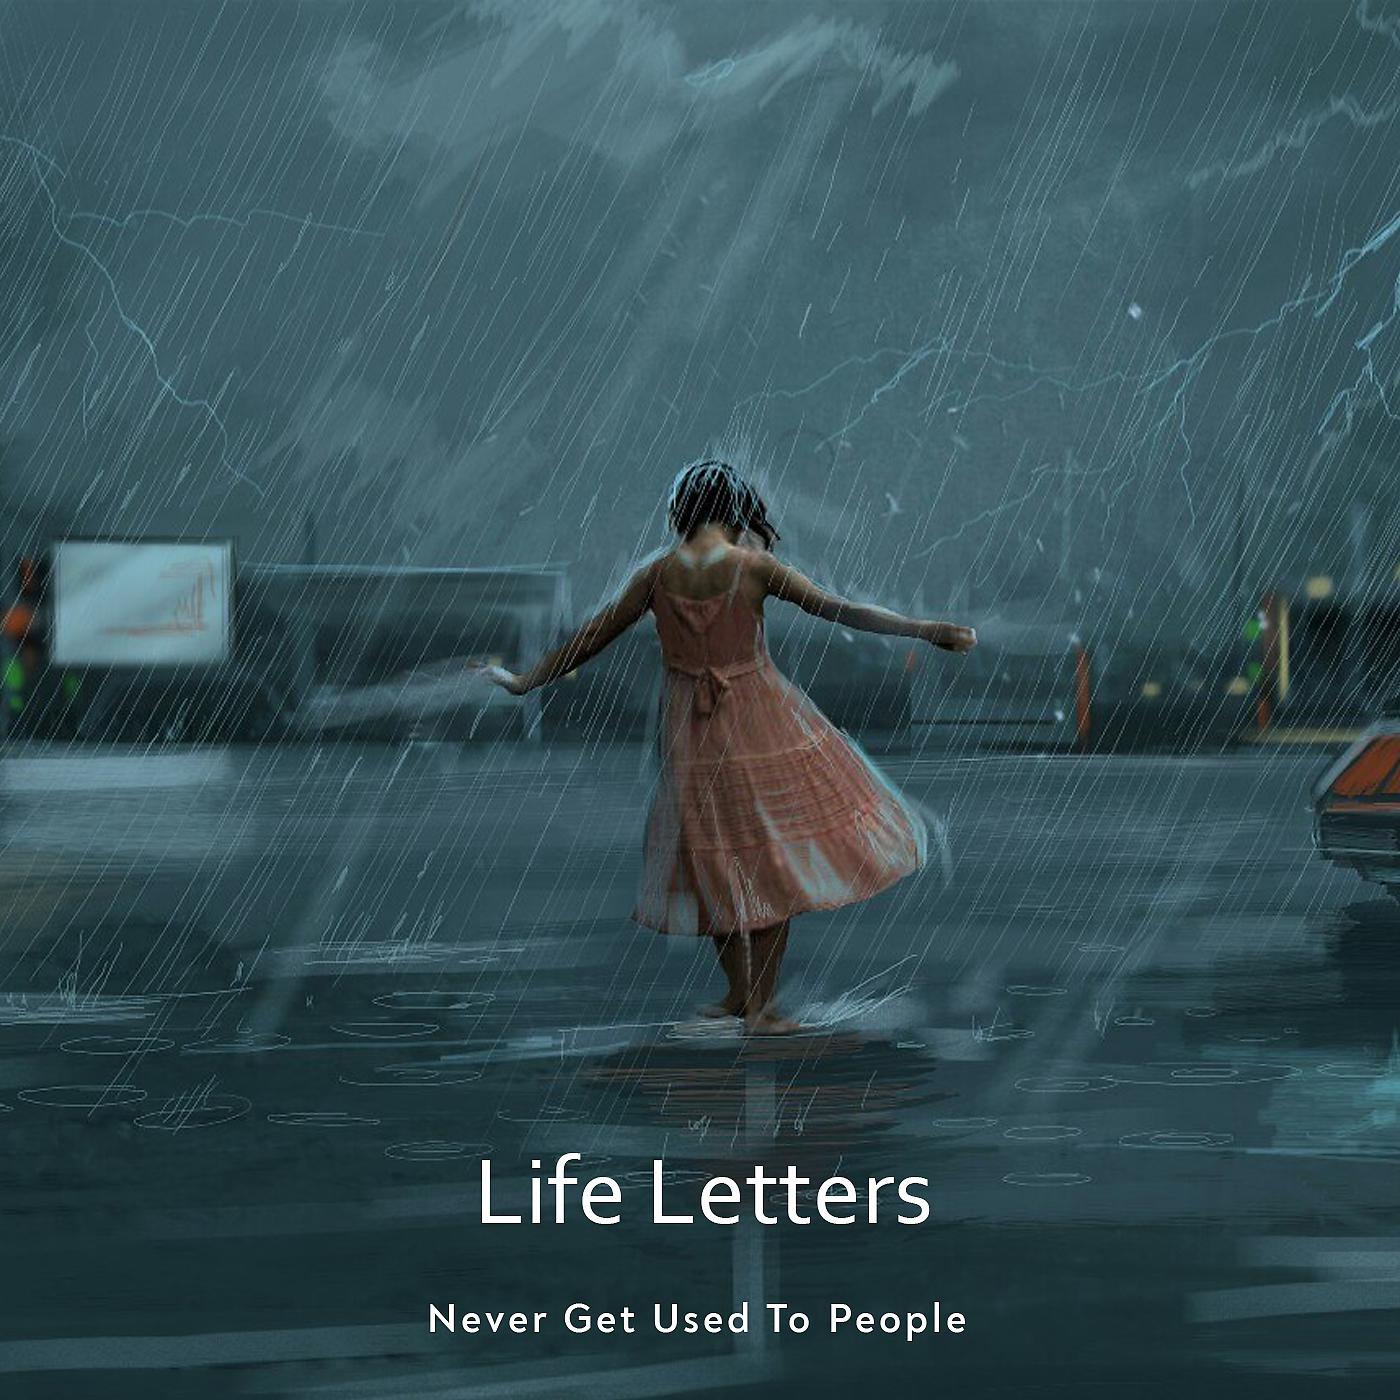 Never get used to people life letters. Life Letters never get used to people. Never get used to people. Life Letters. Трек Life Letters.